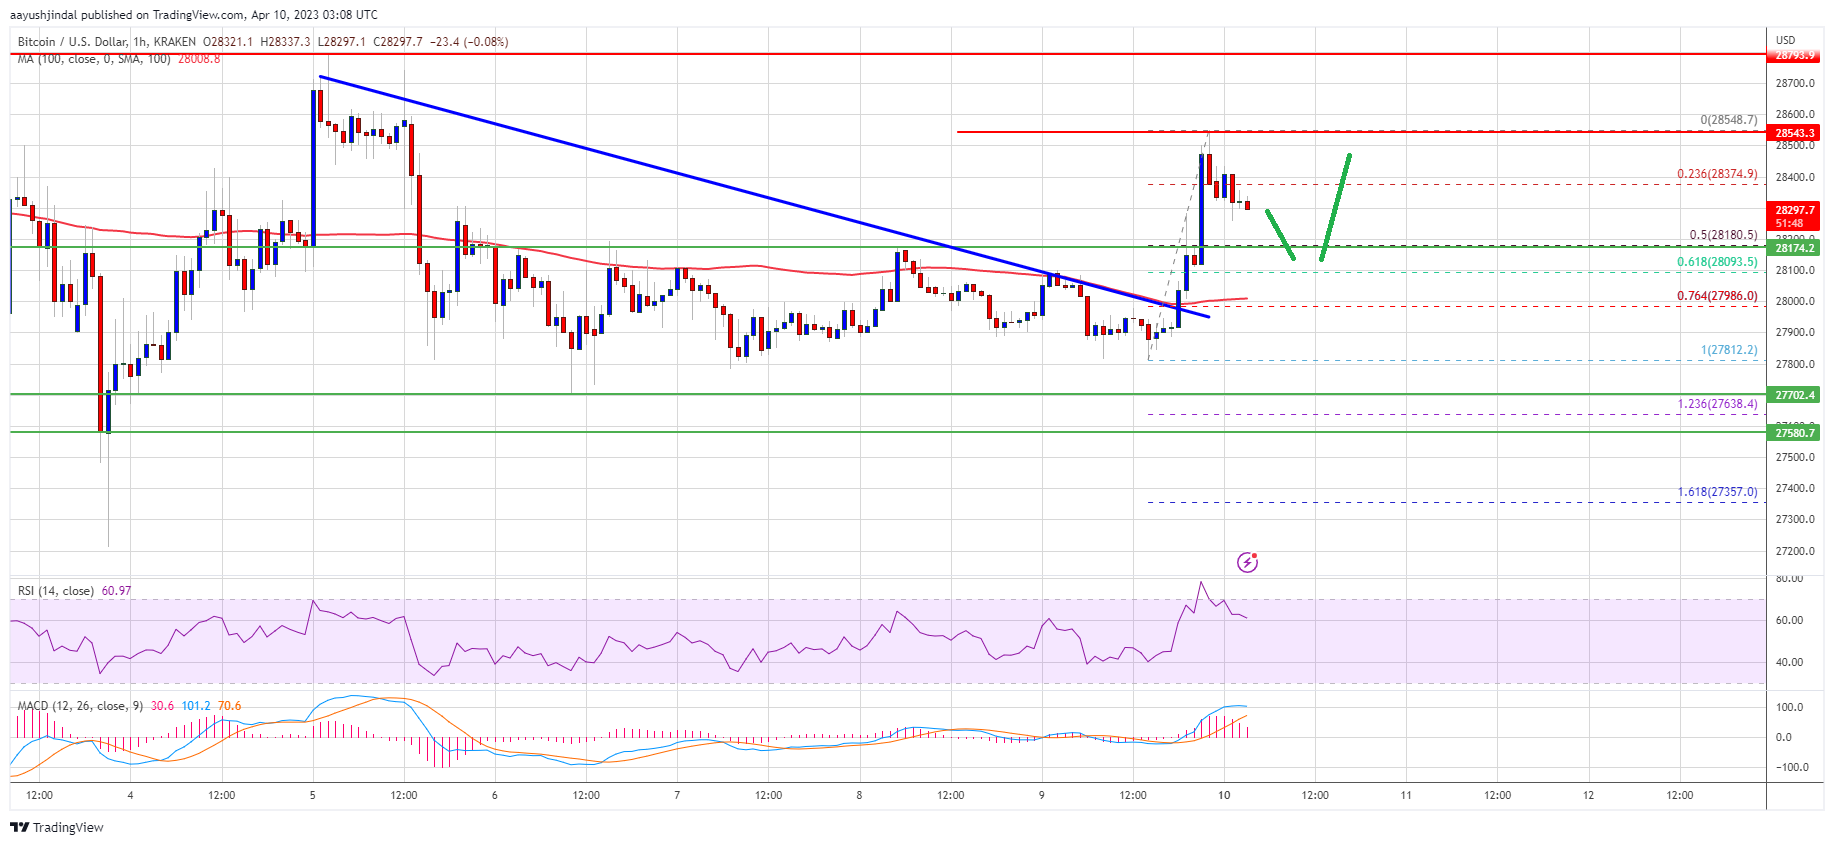 Bitcoin Price Regains Traction But Key Resistance Is Still Intact